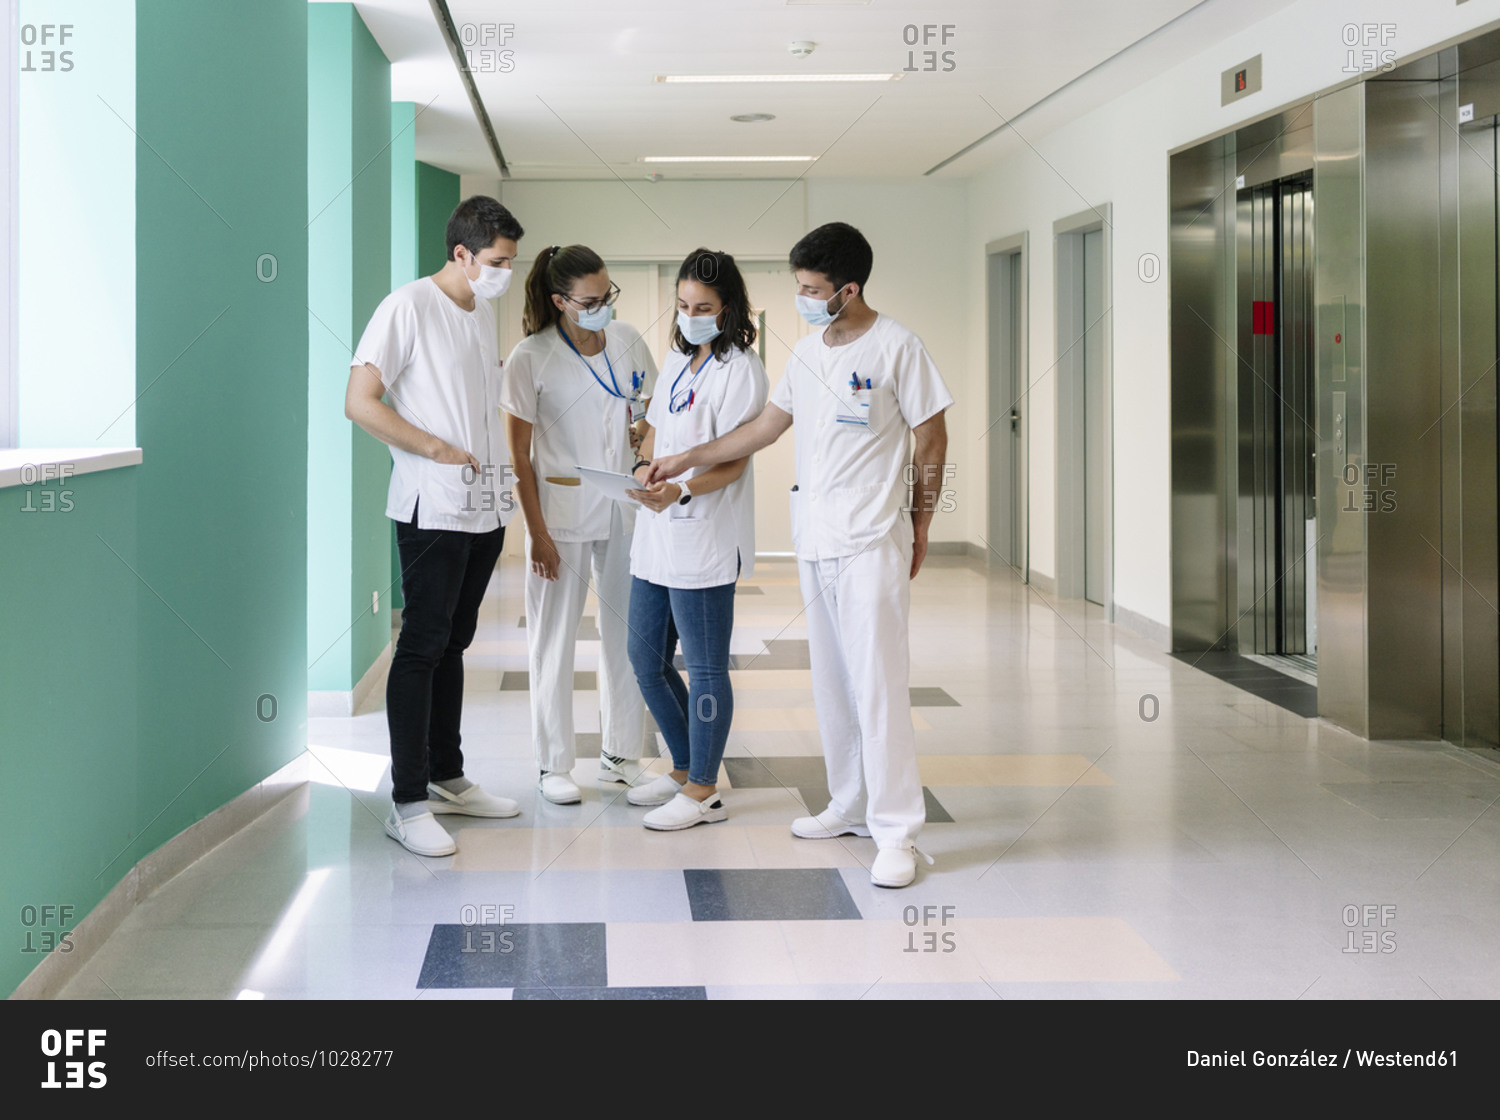 Doctors wearing surgical masks discussing over digital tablet while standing in corridor at hospital